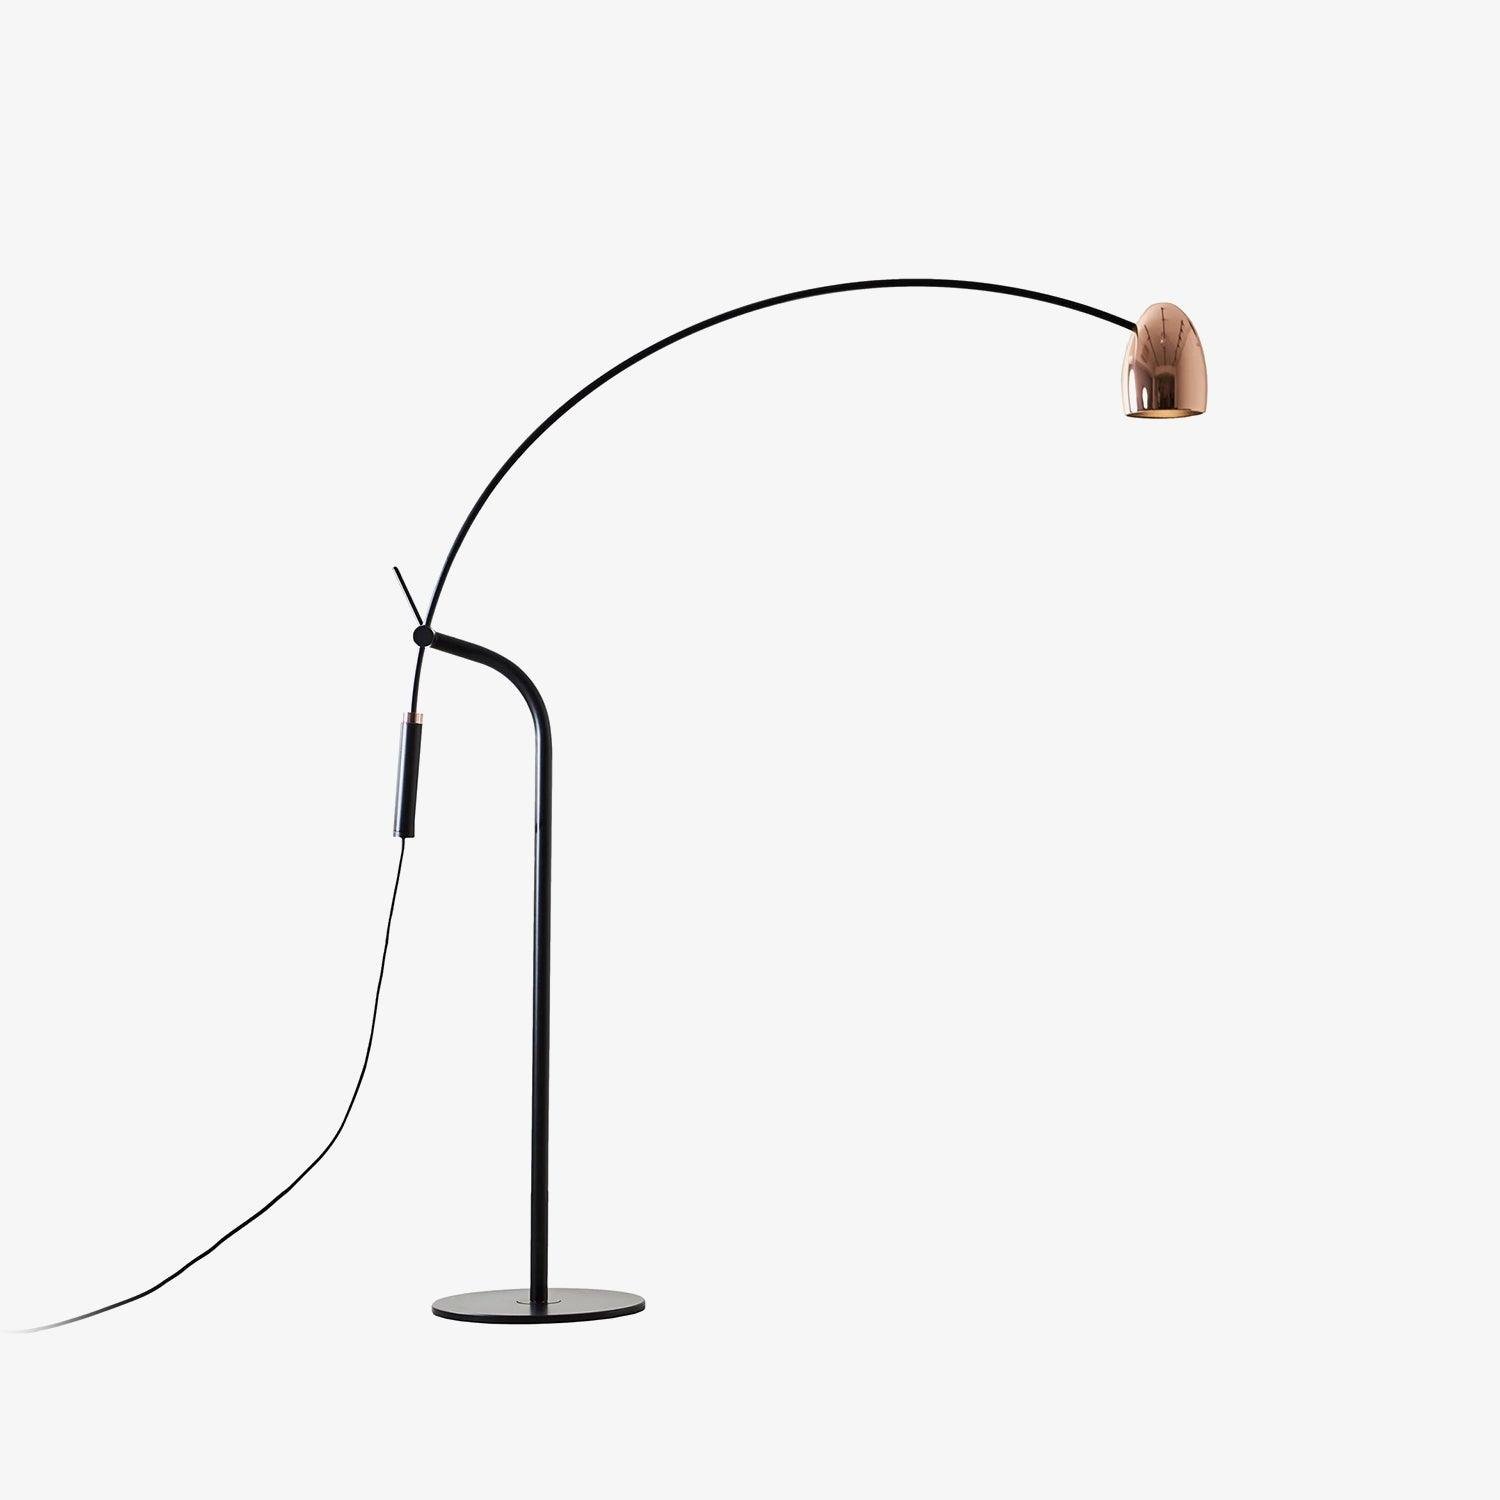 Black + Rose Gold Hercules Floor Lamp with a diameter of 45.3 inches and a height of 65 inches, or 115cm x 165cm respectively, equipped with an EU plug